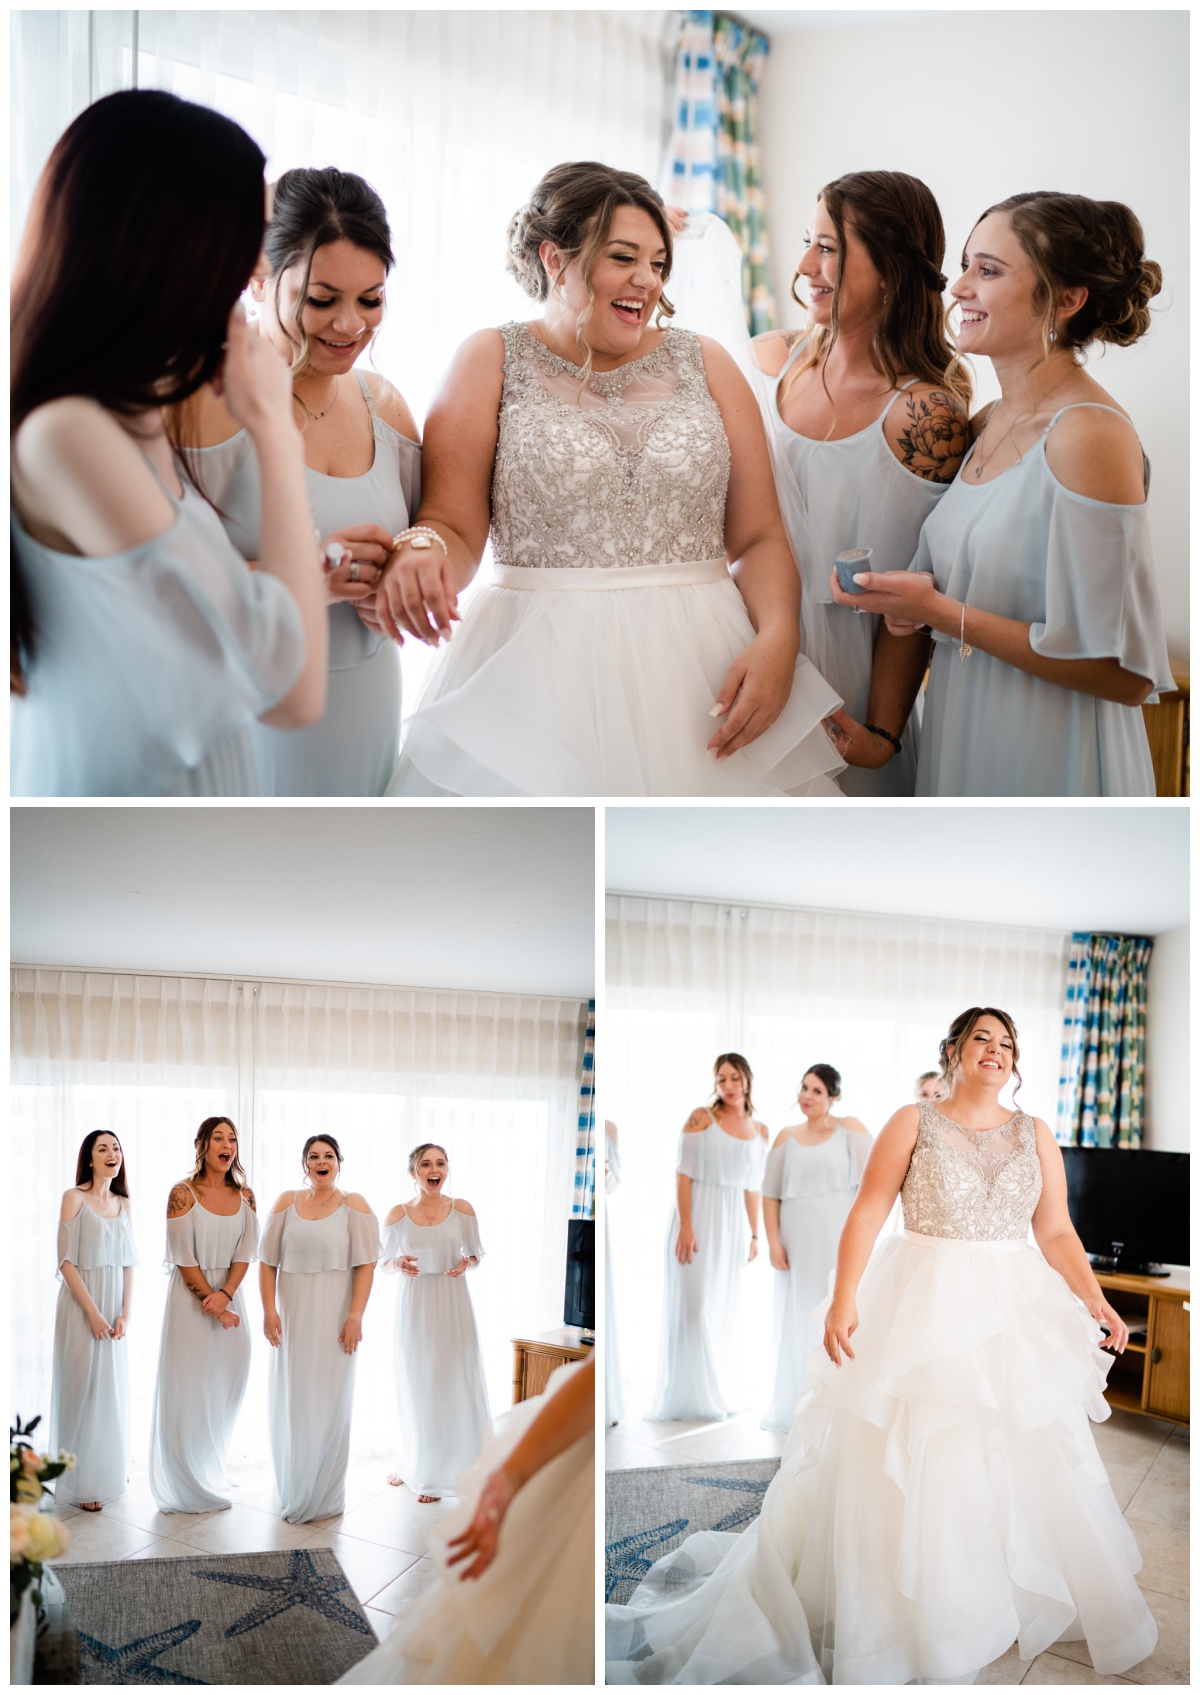 Bridesmaids see bride in her gown for the first time. Photographed by Bonita Springs wedding photographer